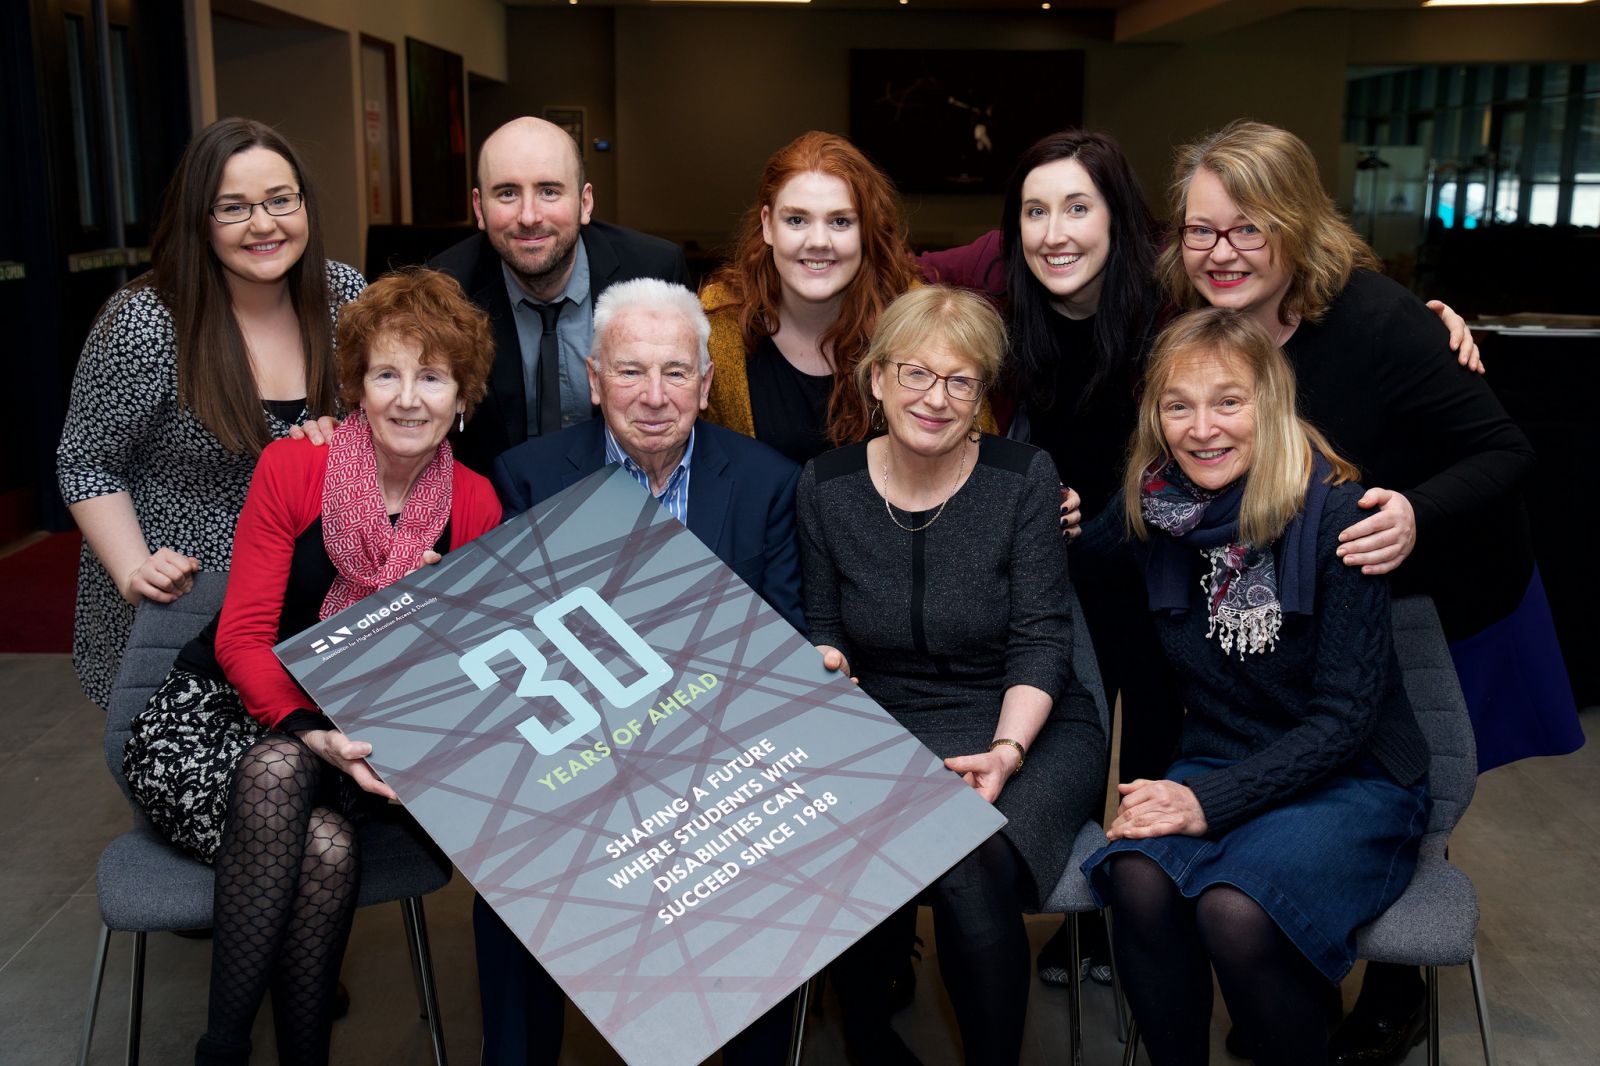 Prof. John Kelly celebrates AHEAD's 30th birthday with AHEAD Director Ann Heelan and the rest of the AHEAD team